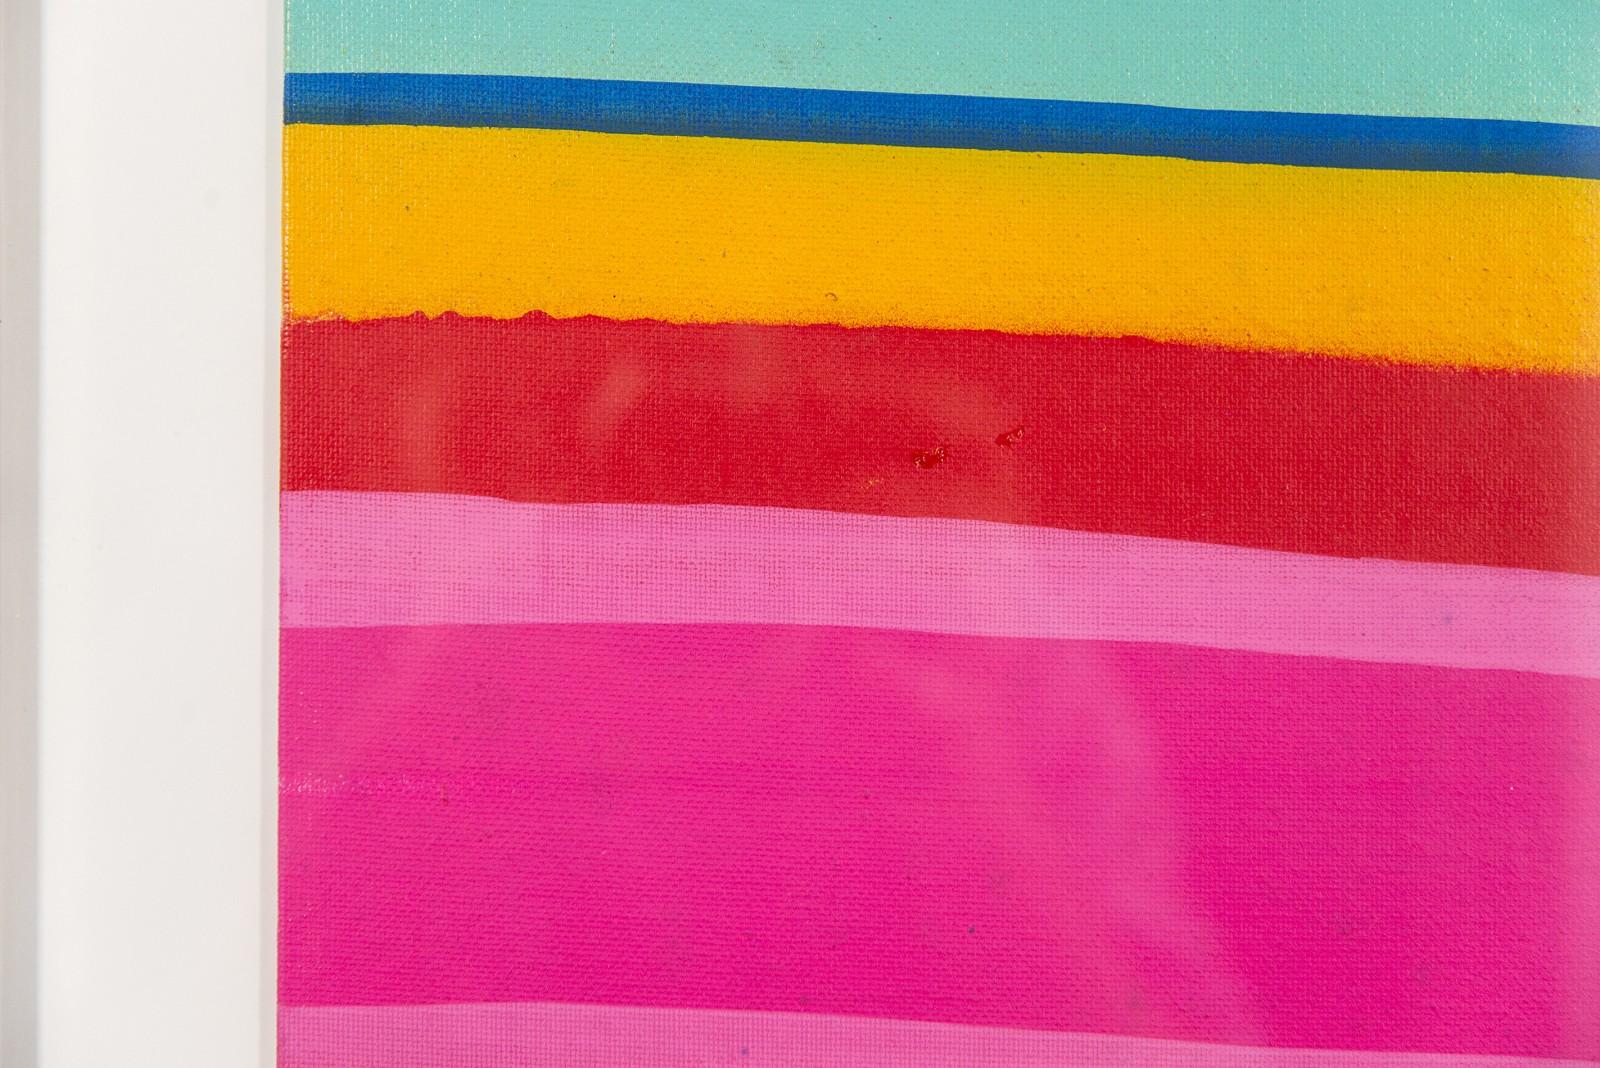 Like the stripes on a beach umbrella, fun, fresh rainbow colours are layered in contrasting ‘waves’ in this delightful pop art painting by Serbian-born artist, Viktor Mitic. This is one in a series of seaside-themed paintings that share the same